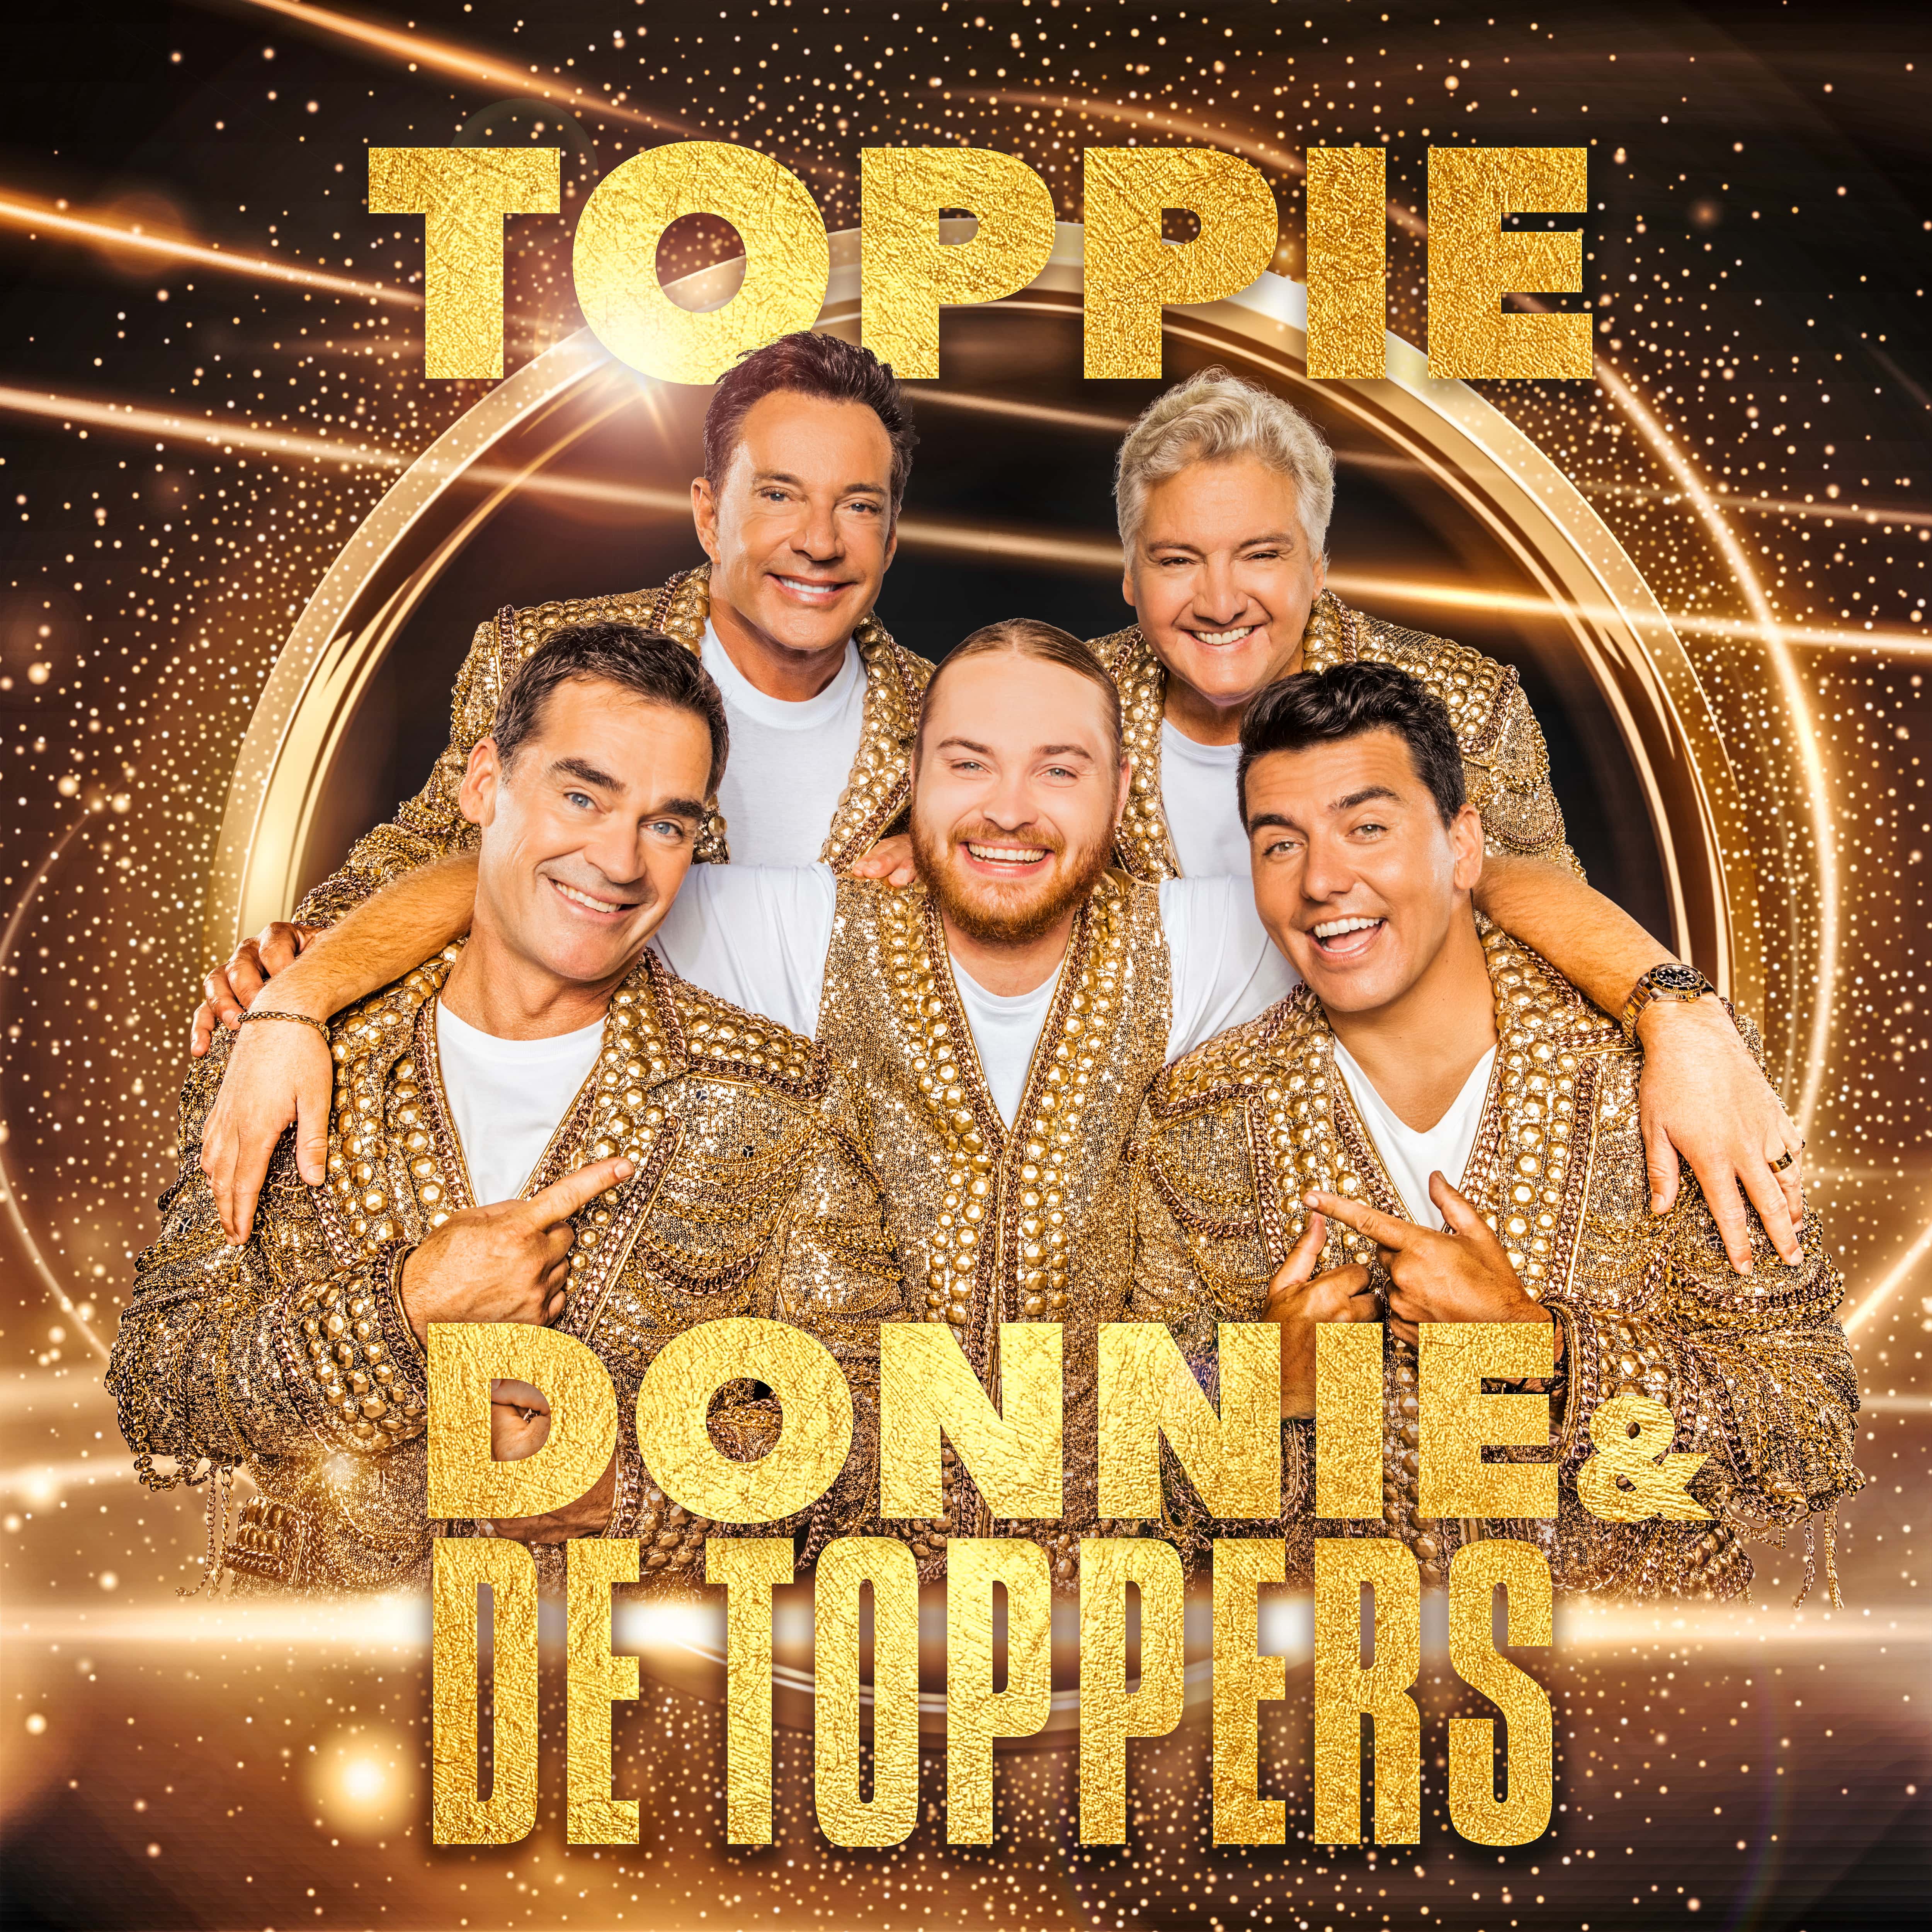 Nieuwe Single: Donnie & De Toppers – Toppie